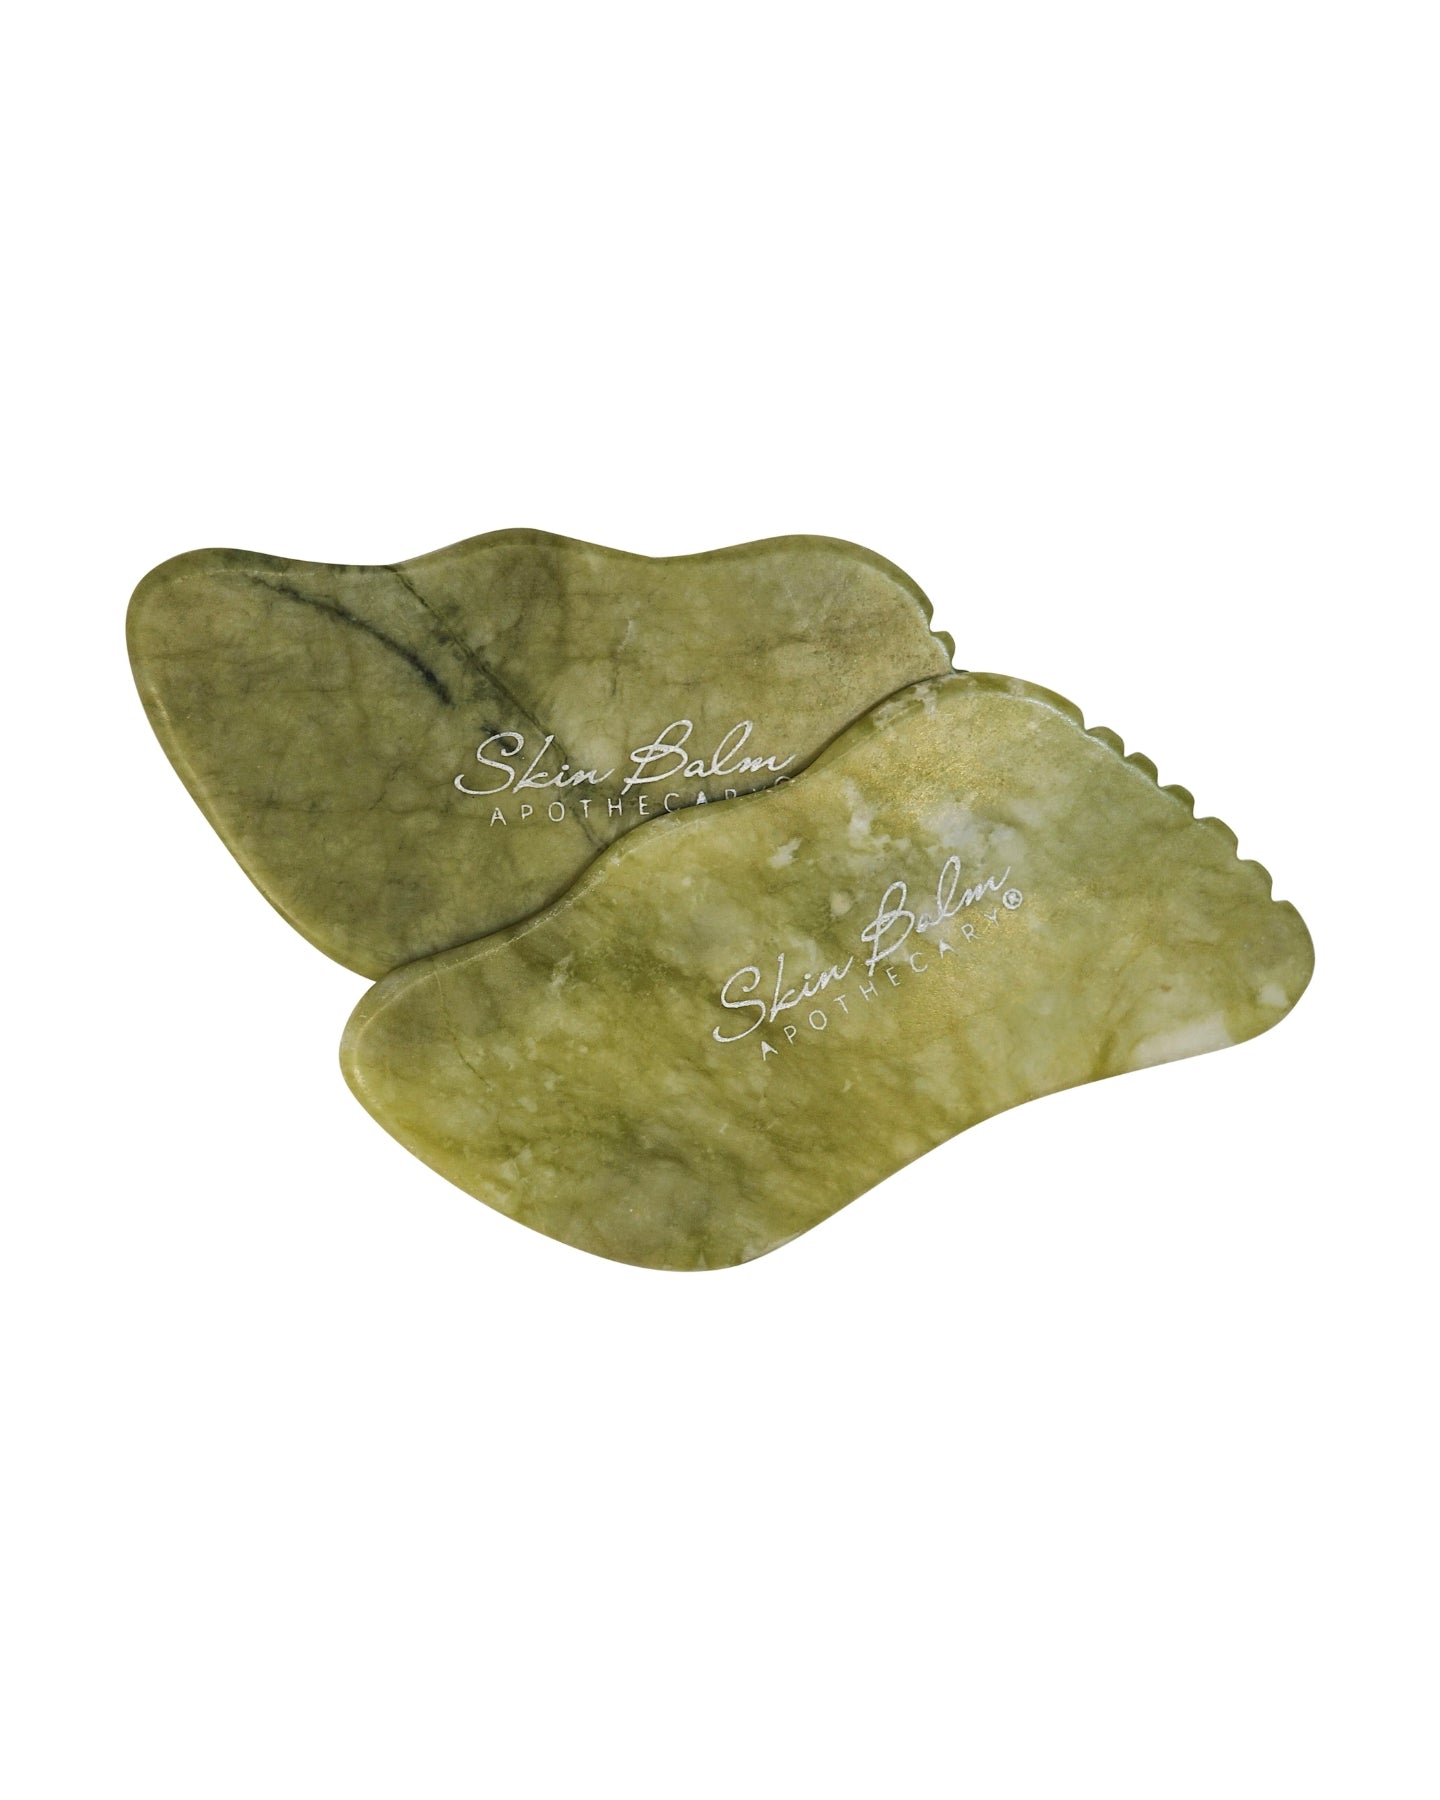 Jade Facial Stone against a white background.